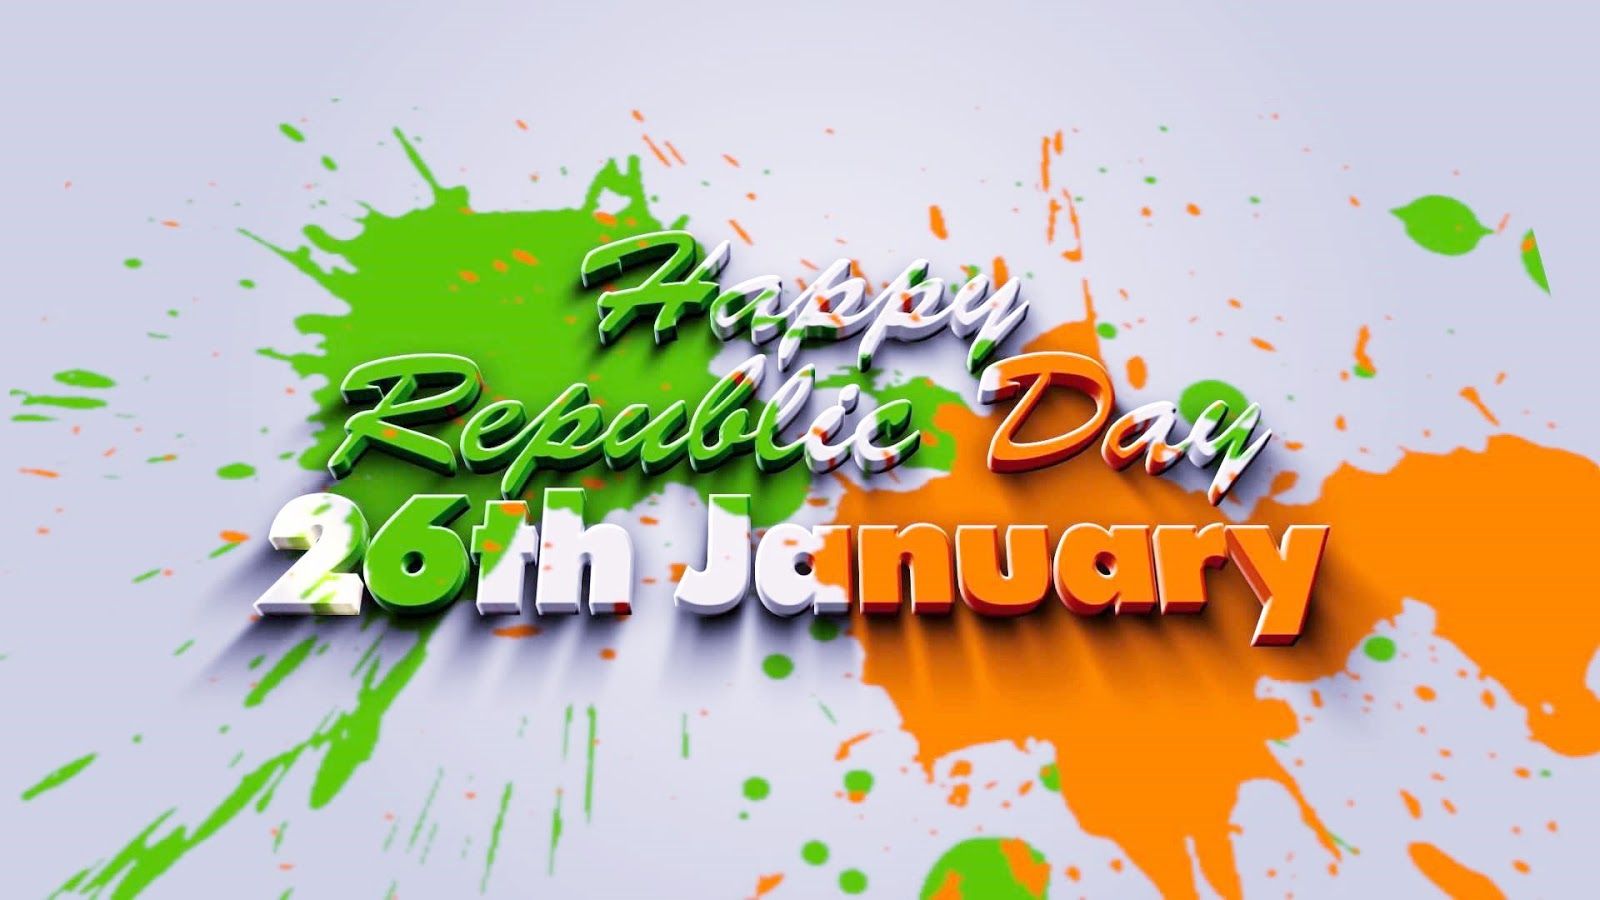 Featured image of post 26 January Hd Images 2021 Download - 26 जनवरी (गणतंत्र दिवस) पर आपके लिए happy republic day images, wallpaper, greeting cards अपडेट किए है जिसे happy republic day 2021 images, wallpaper &amp; pictures.